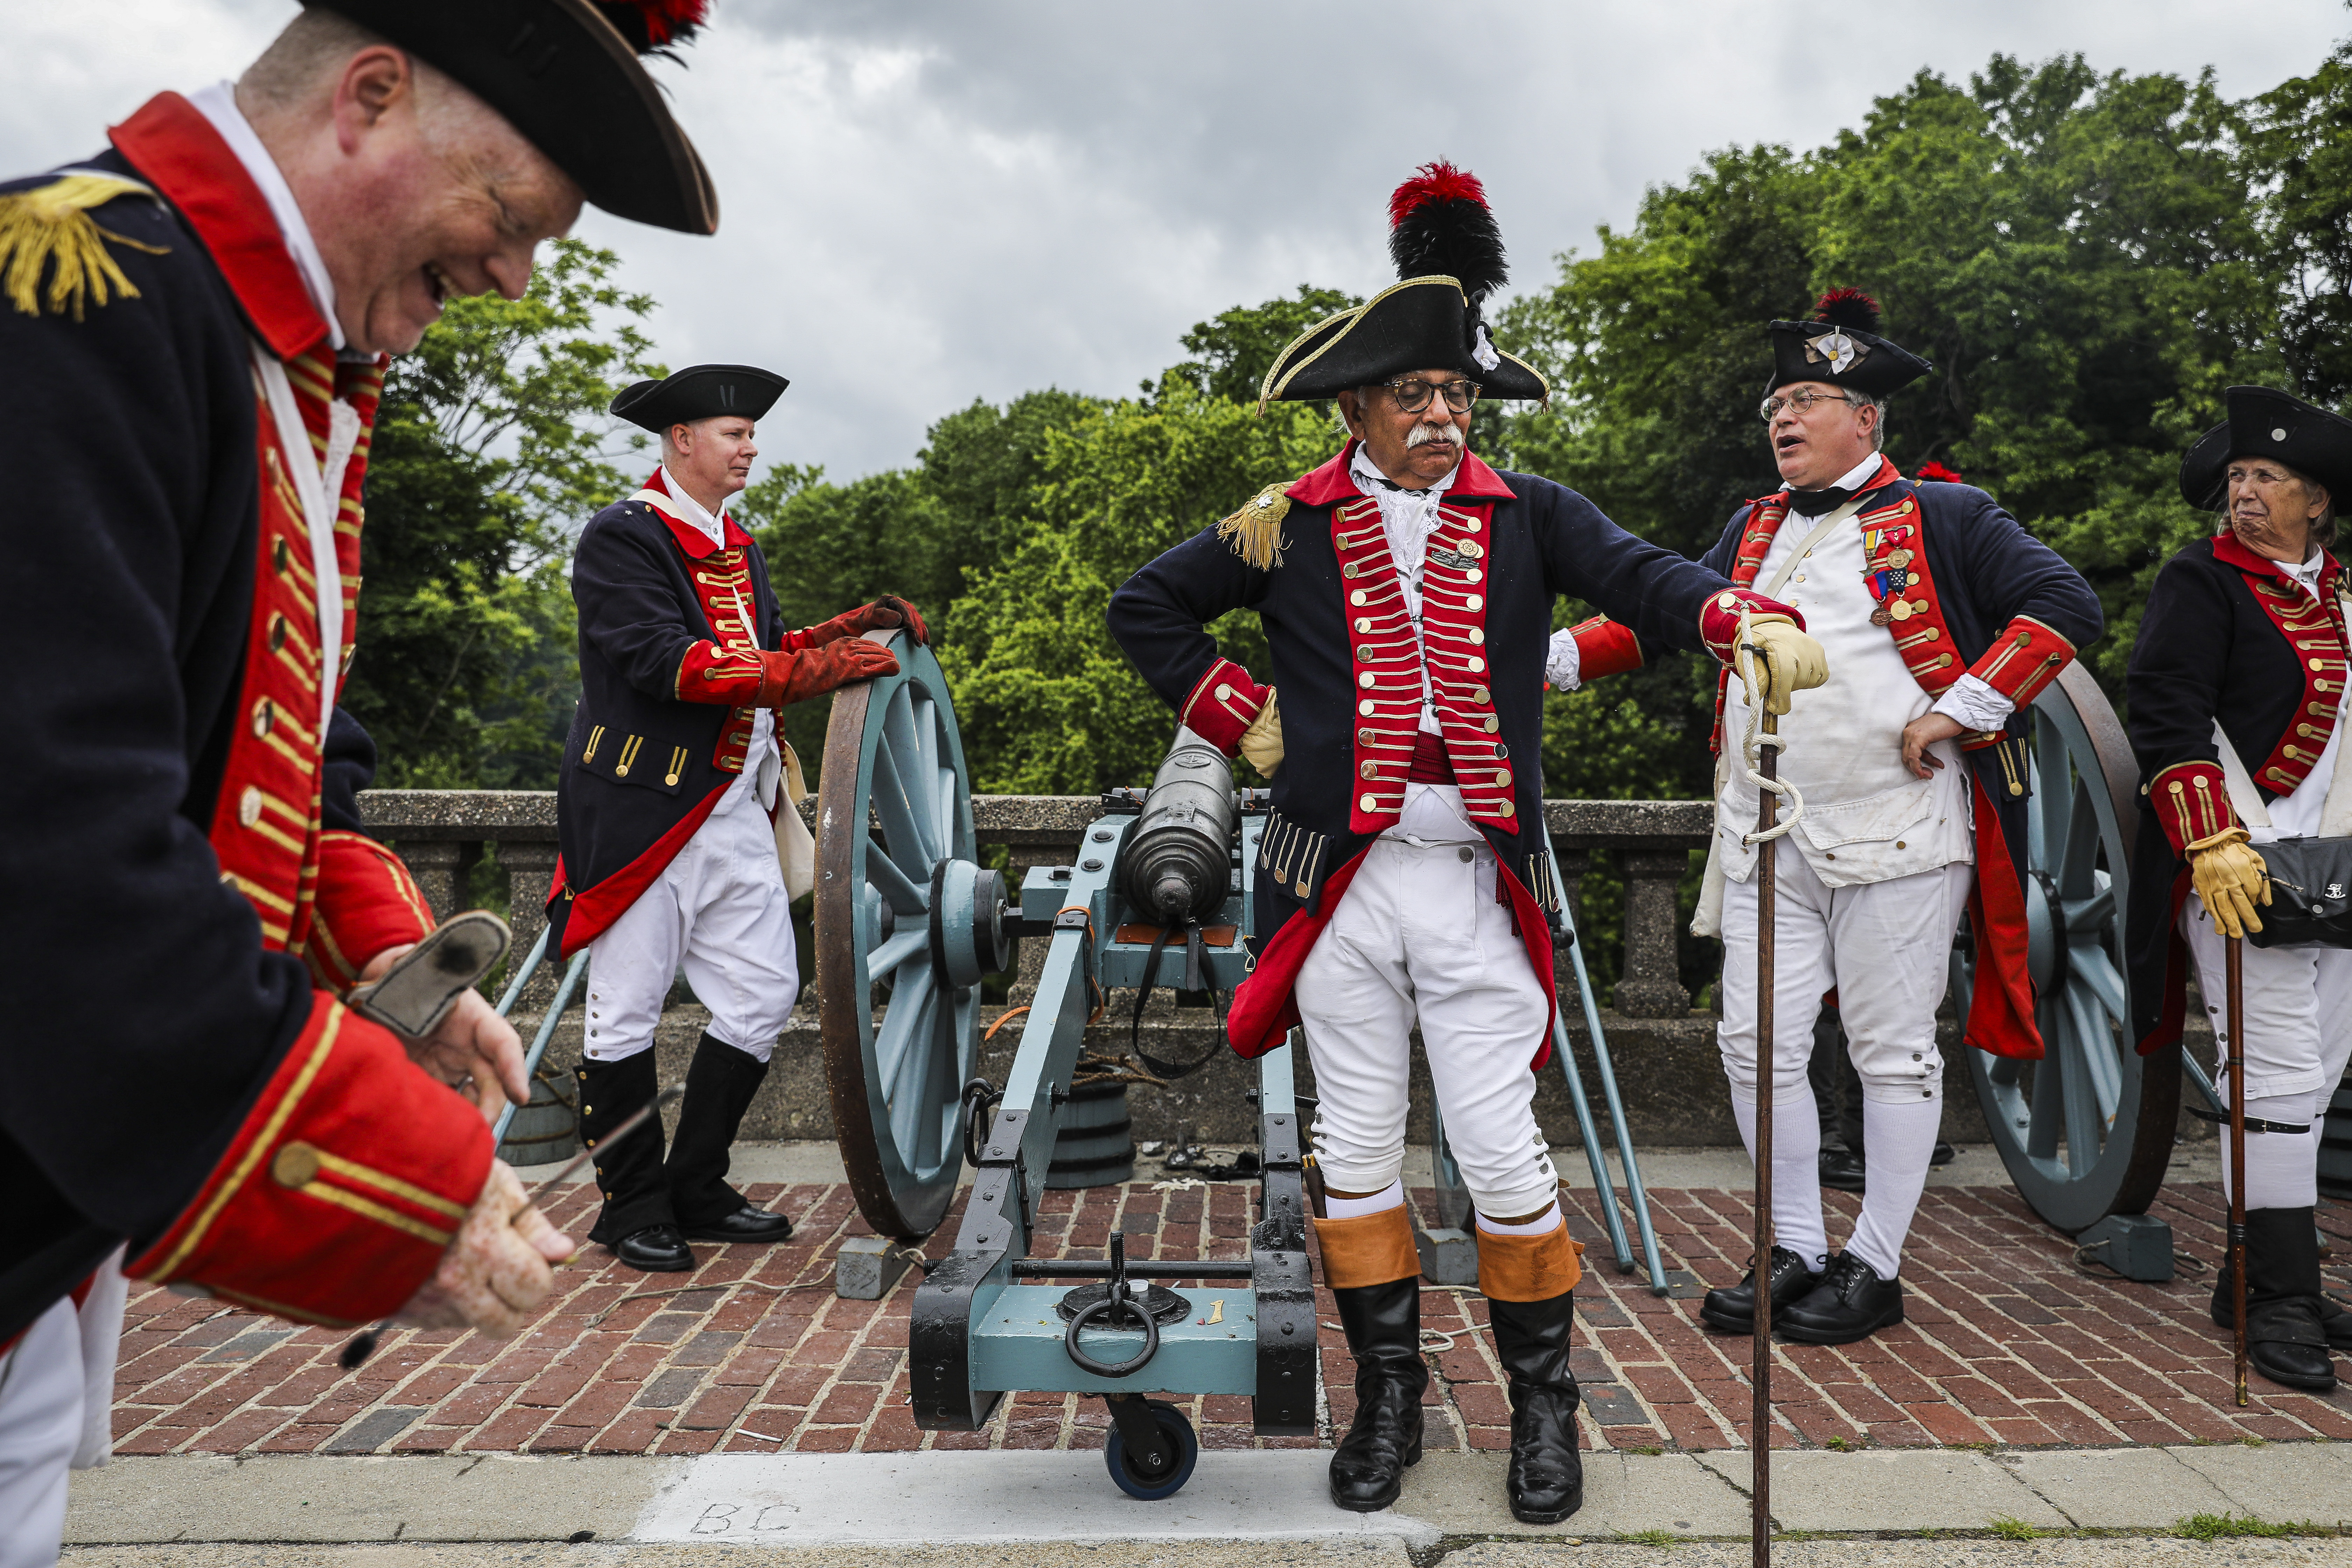 JUNE 12, WARWICK  —  Gaspee Days is a very popular celebration in Rhode Island marking a little-known piece of resistance history. I’m walking along the parade route and start hearing cannons going off. These guys dressed up in reenactment outfits were on this bridge shooting into the creek. The cannons were actually made by Paul Revere in the 1790s, so they were very proud of them, as they should be. They fired it off when I happened to be standing five feet away. It was so loud and jarring, I jumped. I don’t even think I got that shot. – Erin Clark